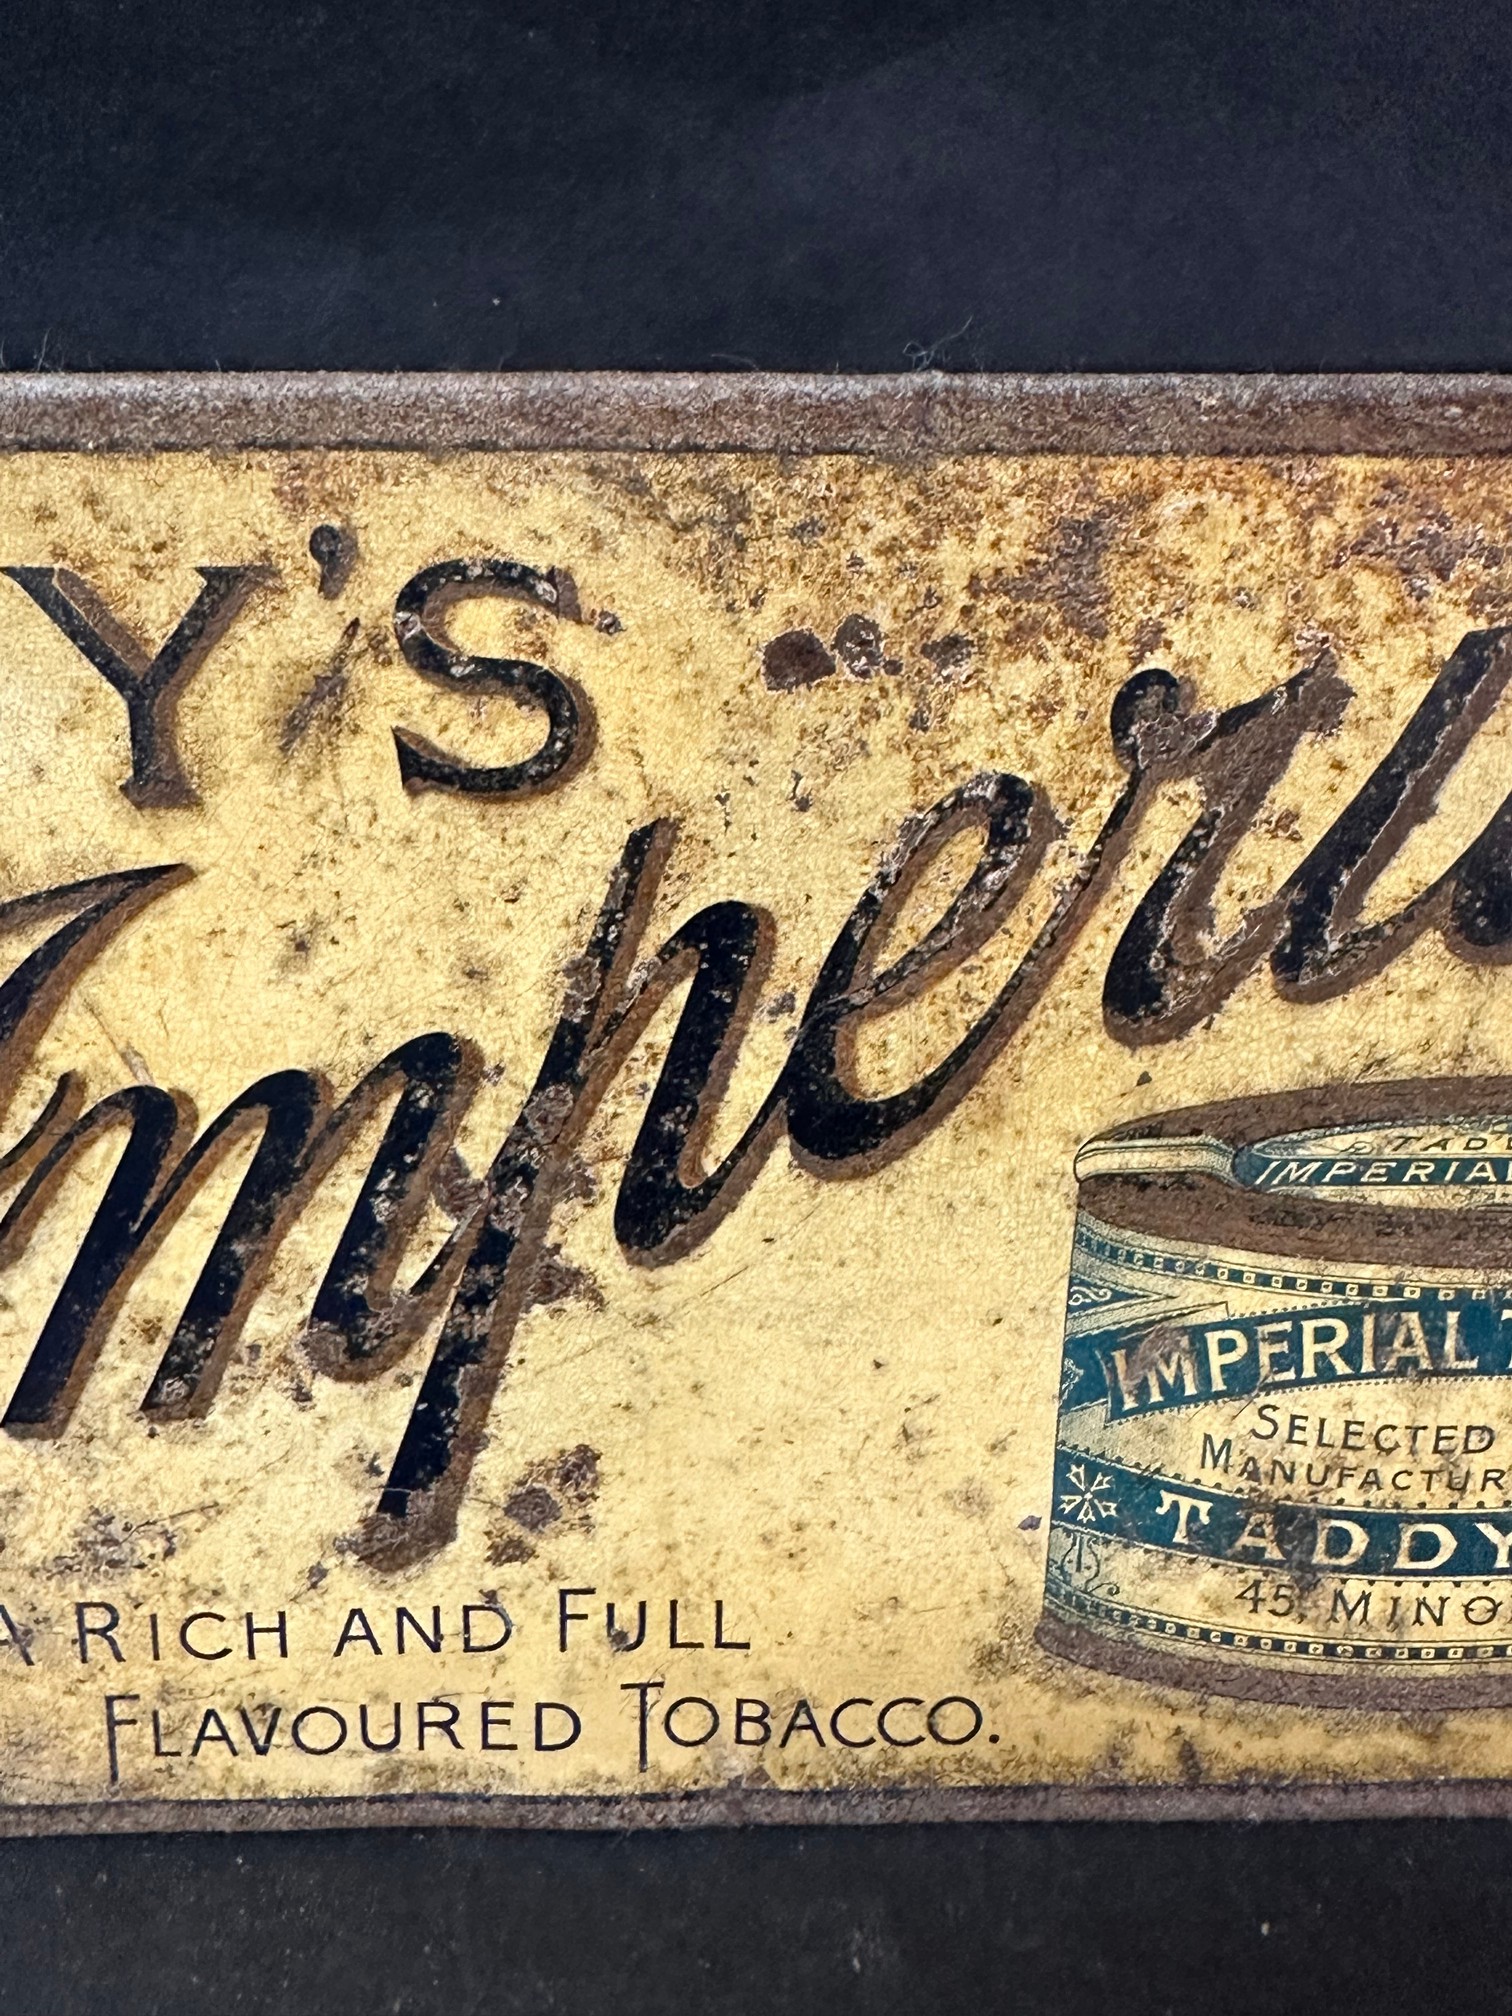 A Taddy's Imperial Tobacco tin advertising sign, 13 x 6". - Image 4 of 5